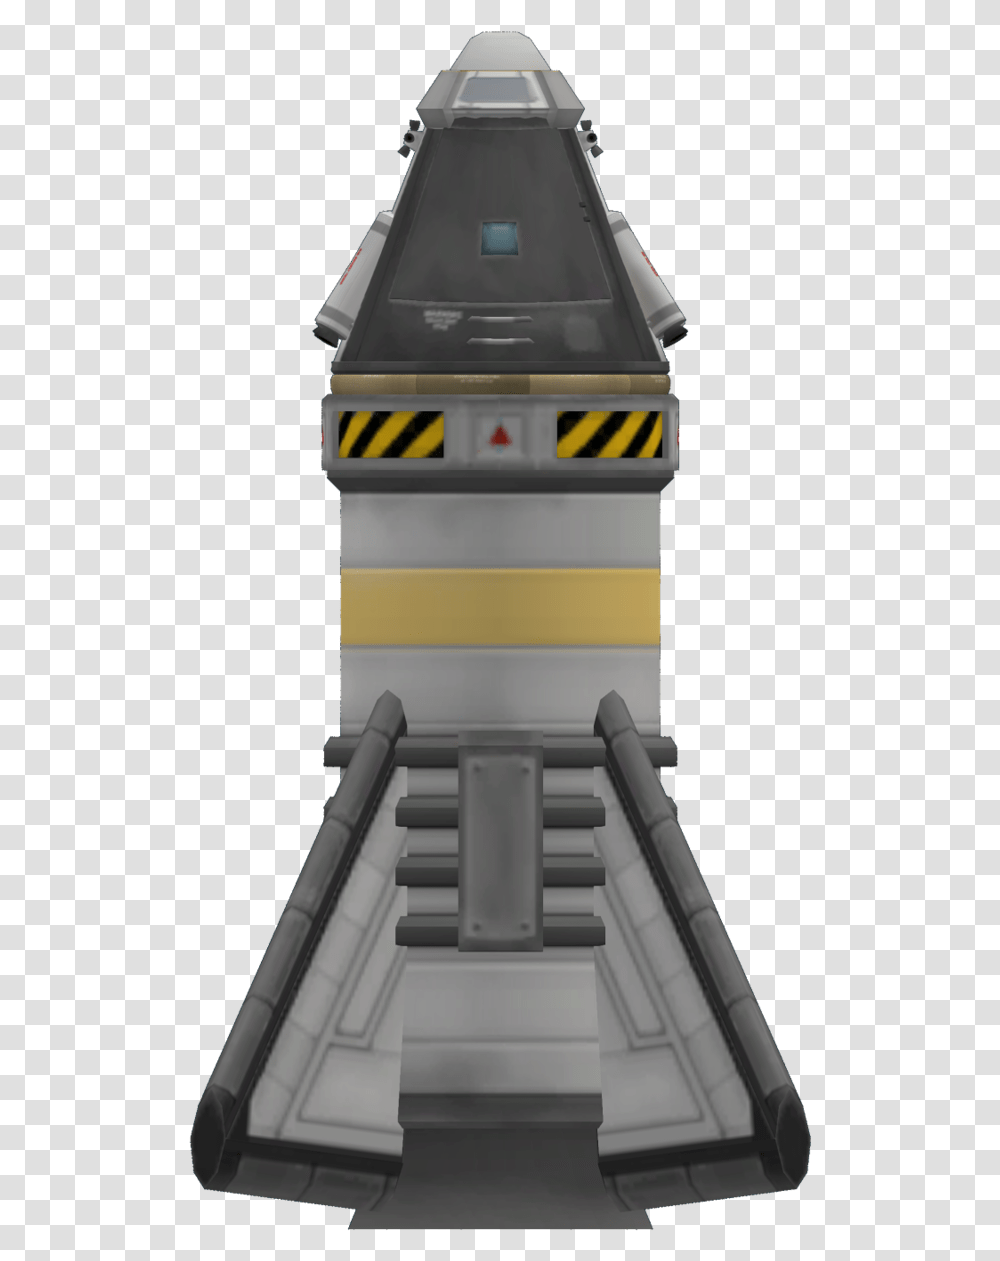 Kerbal Program Angle Plane Space Free Frame Battleship, Building, Architecture, Machine, Tower Transparent Png